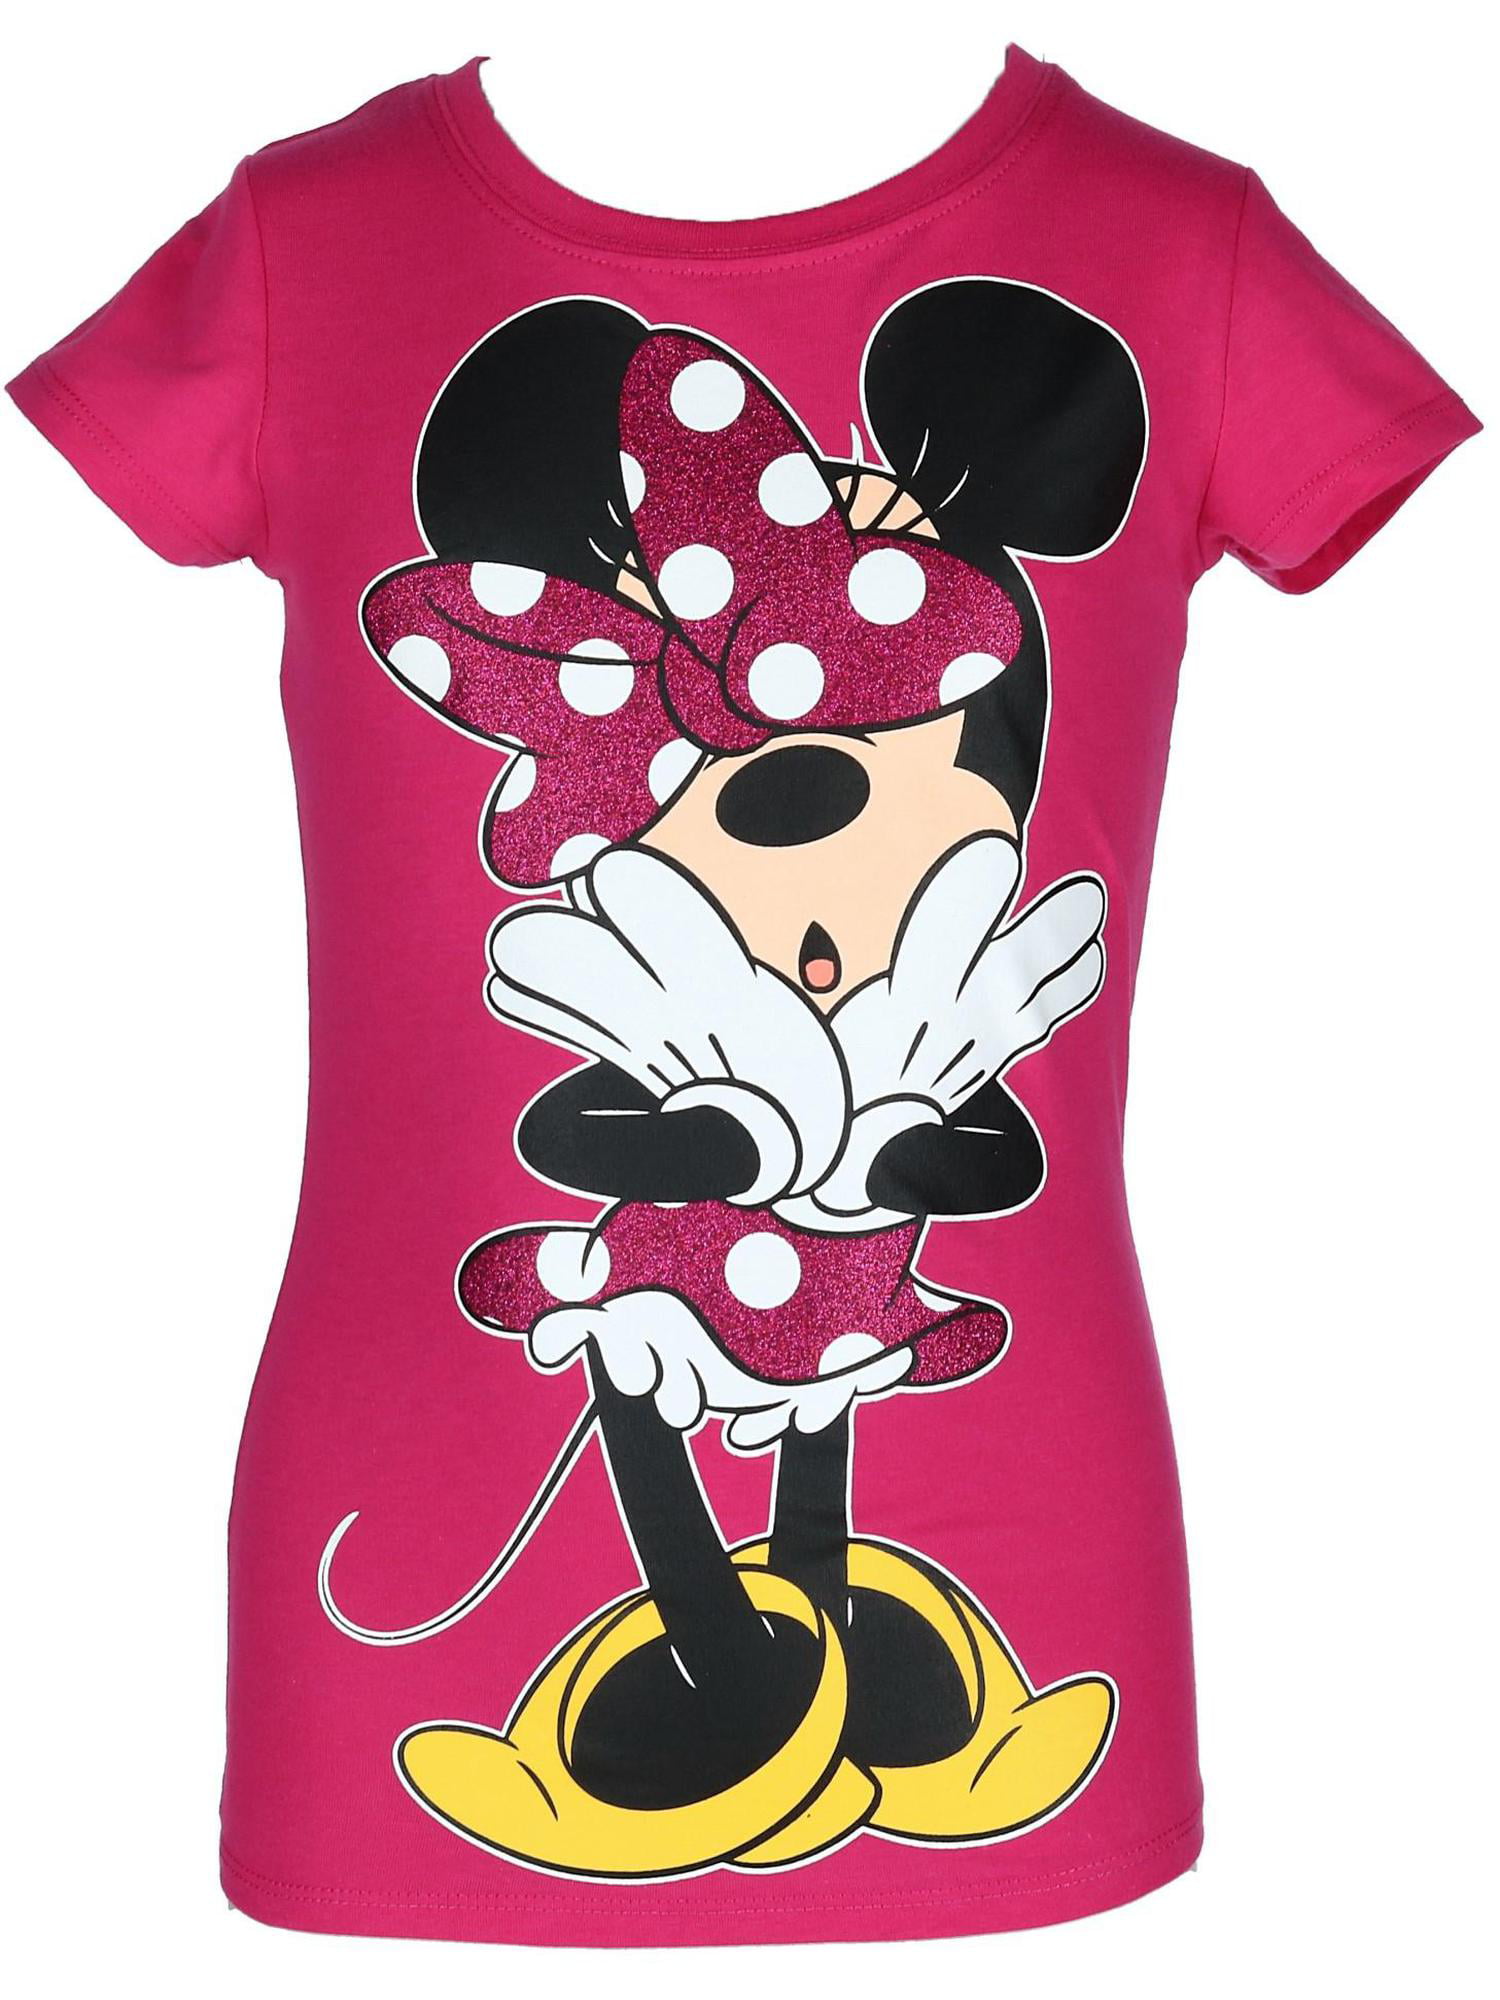 Girls Minnie Mouse T-Shirt Kids Disney Tee Sequin Bow Pink Top New Age 2-8 